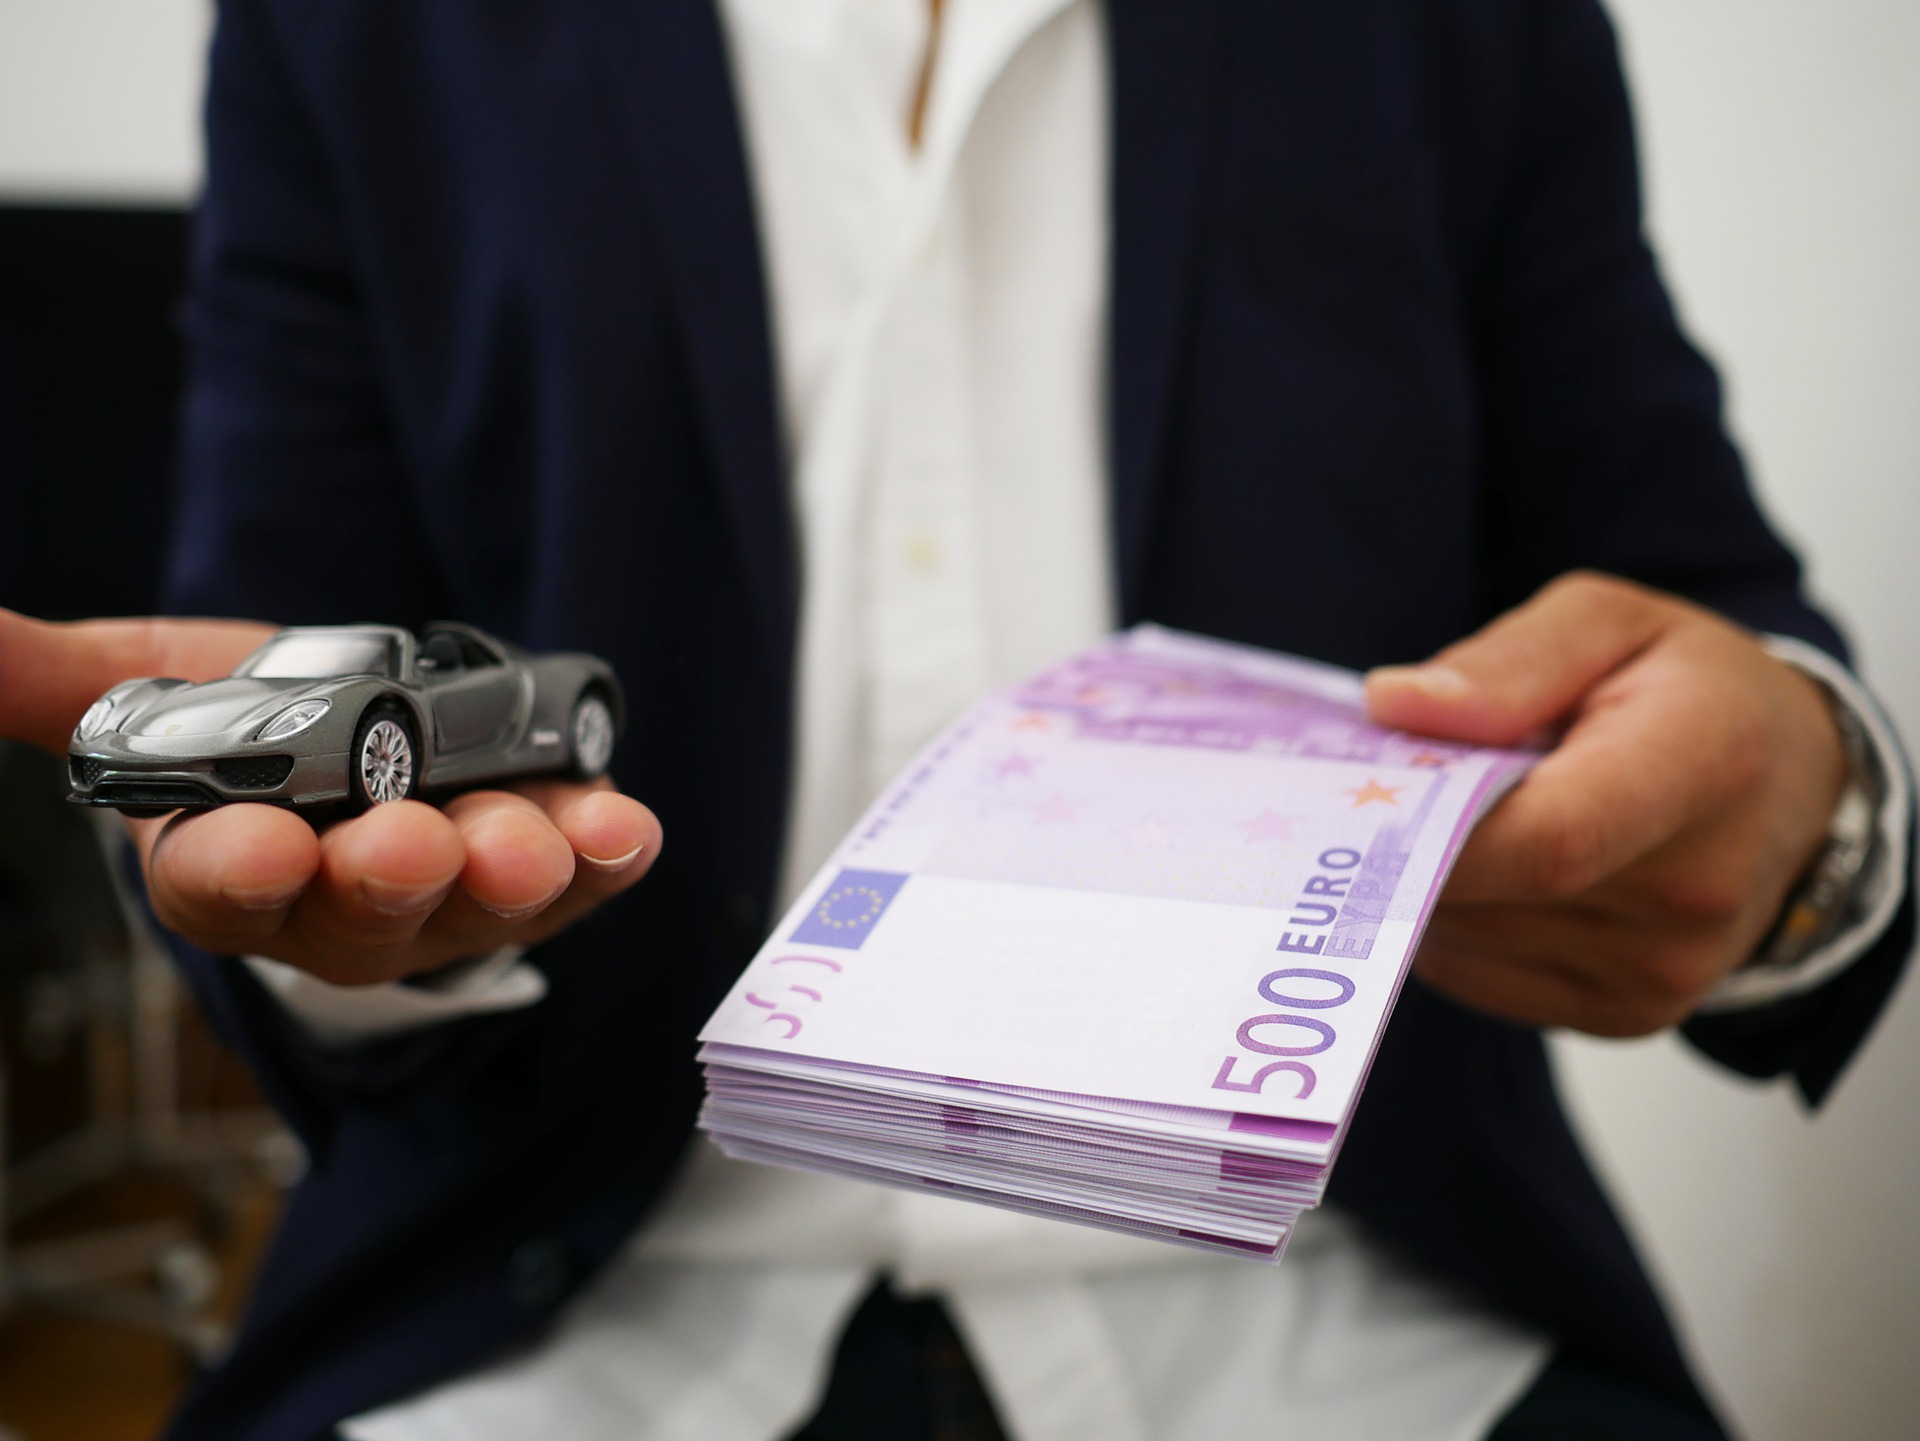 Ranking of the best banks for a car loan for 2022